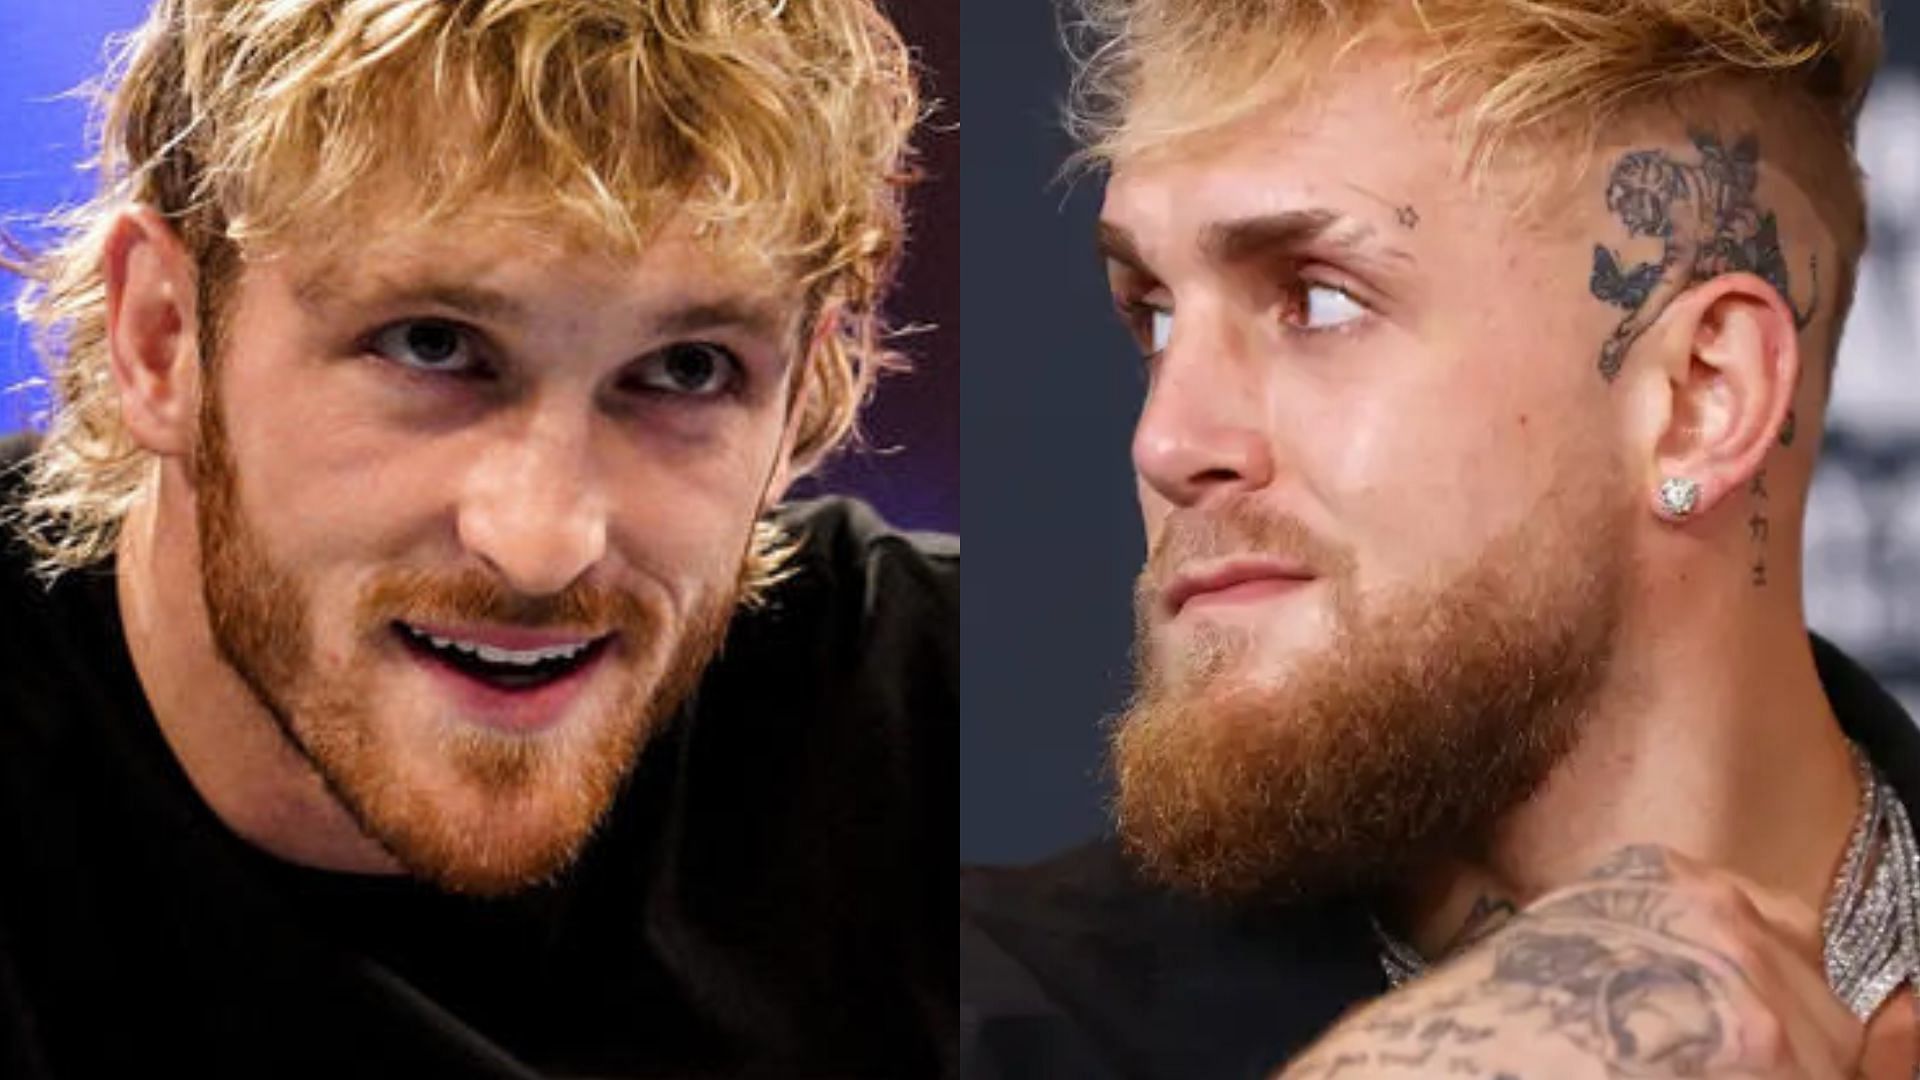 Tomorrow my brother will become the WWE champion of the world. Inshallah.  @loganpaul.